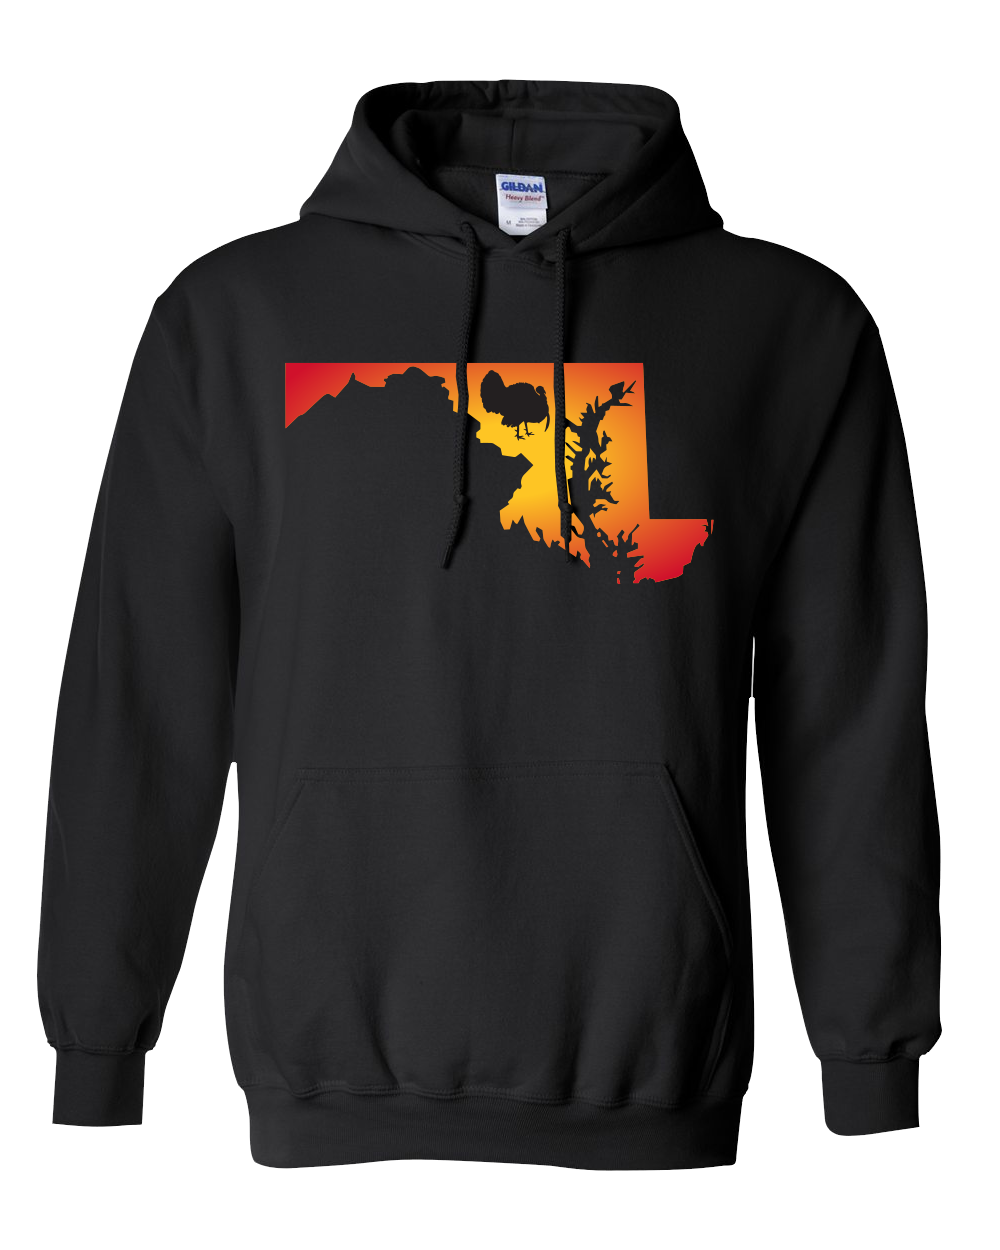 Pullover Hooded Sweatshirt Maryland Black Turkey Vibrant Design High Quality Tight Knit Ring Spun Low Maintenance Cotton Printed With The Newest Available Color Transfer Technology